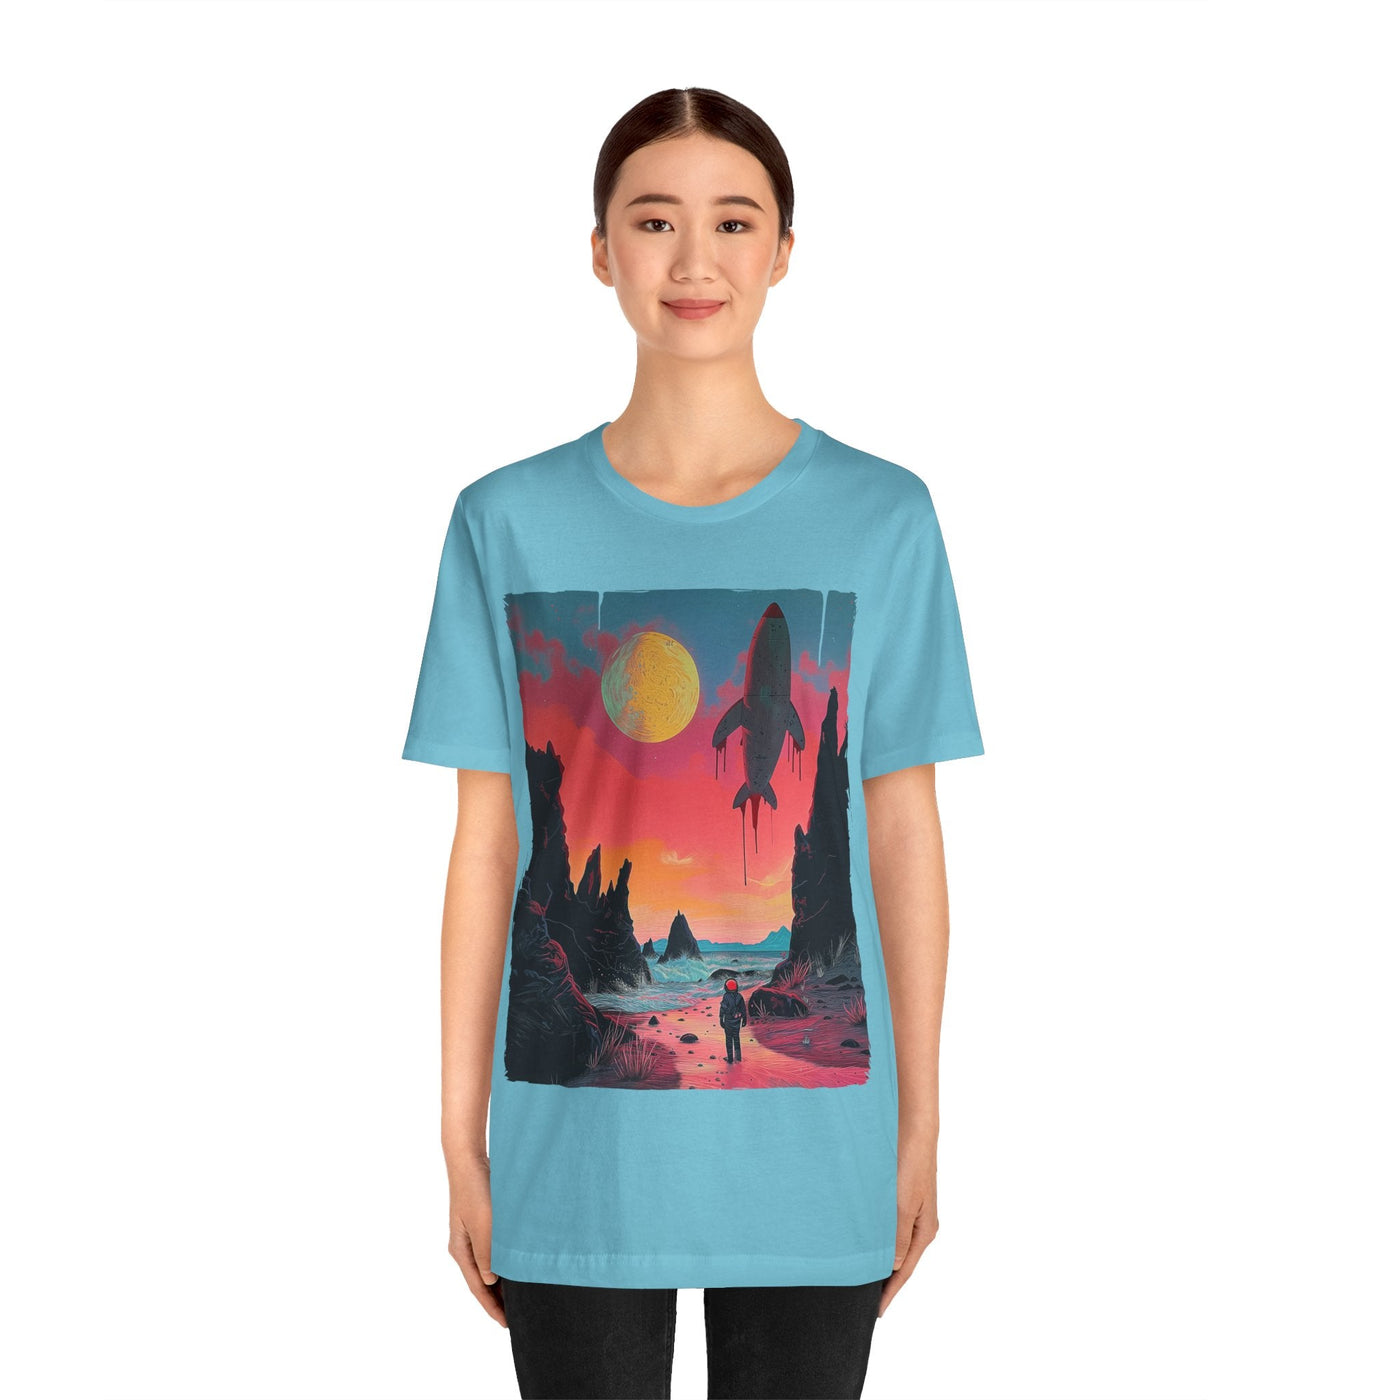 Solitary Beach in a Dystopian Future Unisex T-shirt